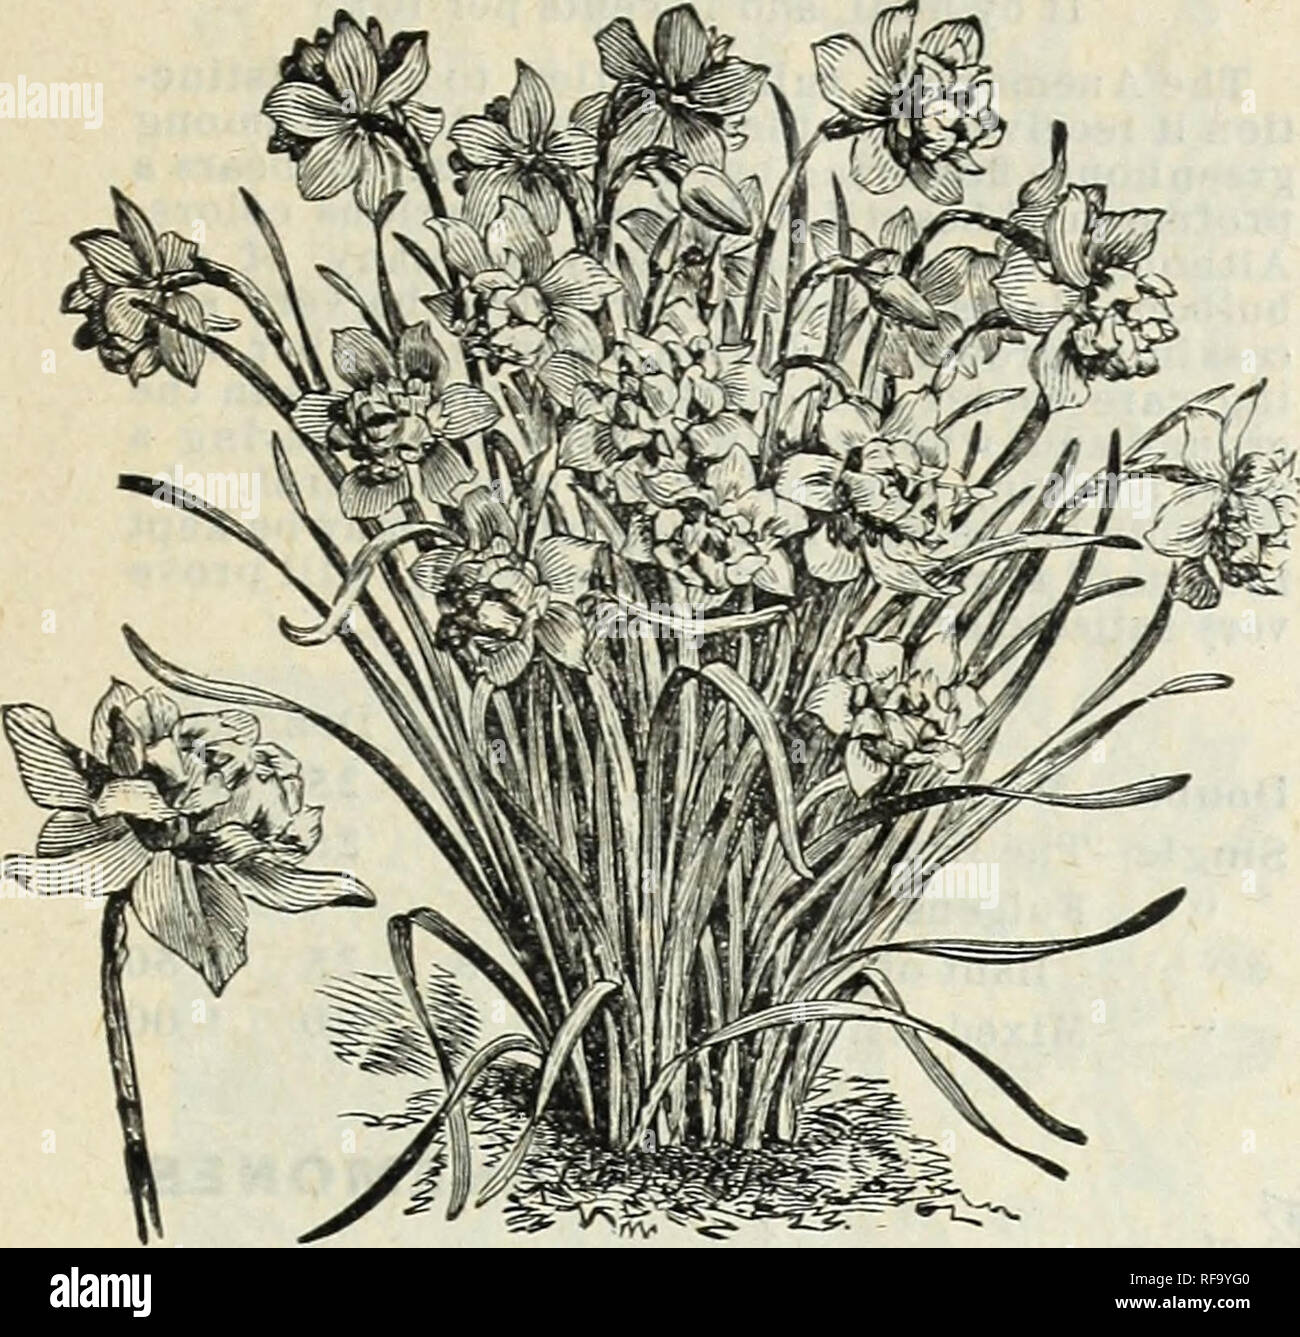 . Catalogue of hardy bulbs, plants, etc. Flowers Seeds Catalogs; Bulbs (Plants) Seeds Catalogs; Nurseries (Horticulture) Catalogs; Plants, Ornamental Catalogs. FLOWERING BULBS, PLANTS, ETC. NARCISSUS-Continued.. DOUBLE NARCISSUS. DAFFODILS. Each. Doz. Per 100 Albus Plenus Odoratus—Pure white, sweet ecented,resembles aGardenia 2 20 $125 Incomparable—(Butter and Eggs) Sulphur yellow, sweet scented 3 25 150 Orange Phoenix—W h 11 e and orange 4 35 2 75 Von Sion —The finest of all double yellow Daffodils, used extensively for forcing as well as for bedding outdoors 3 30 2 00 Mixed 3 25 1 50 POLYANT Stock Photo